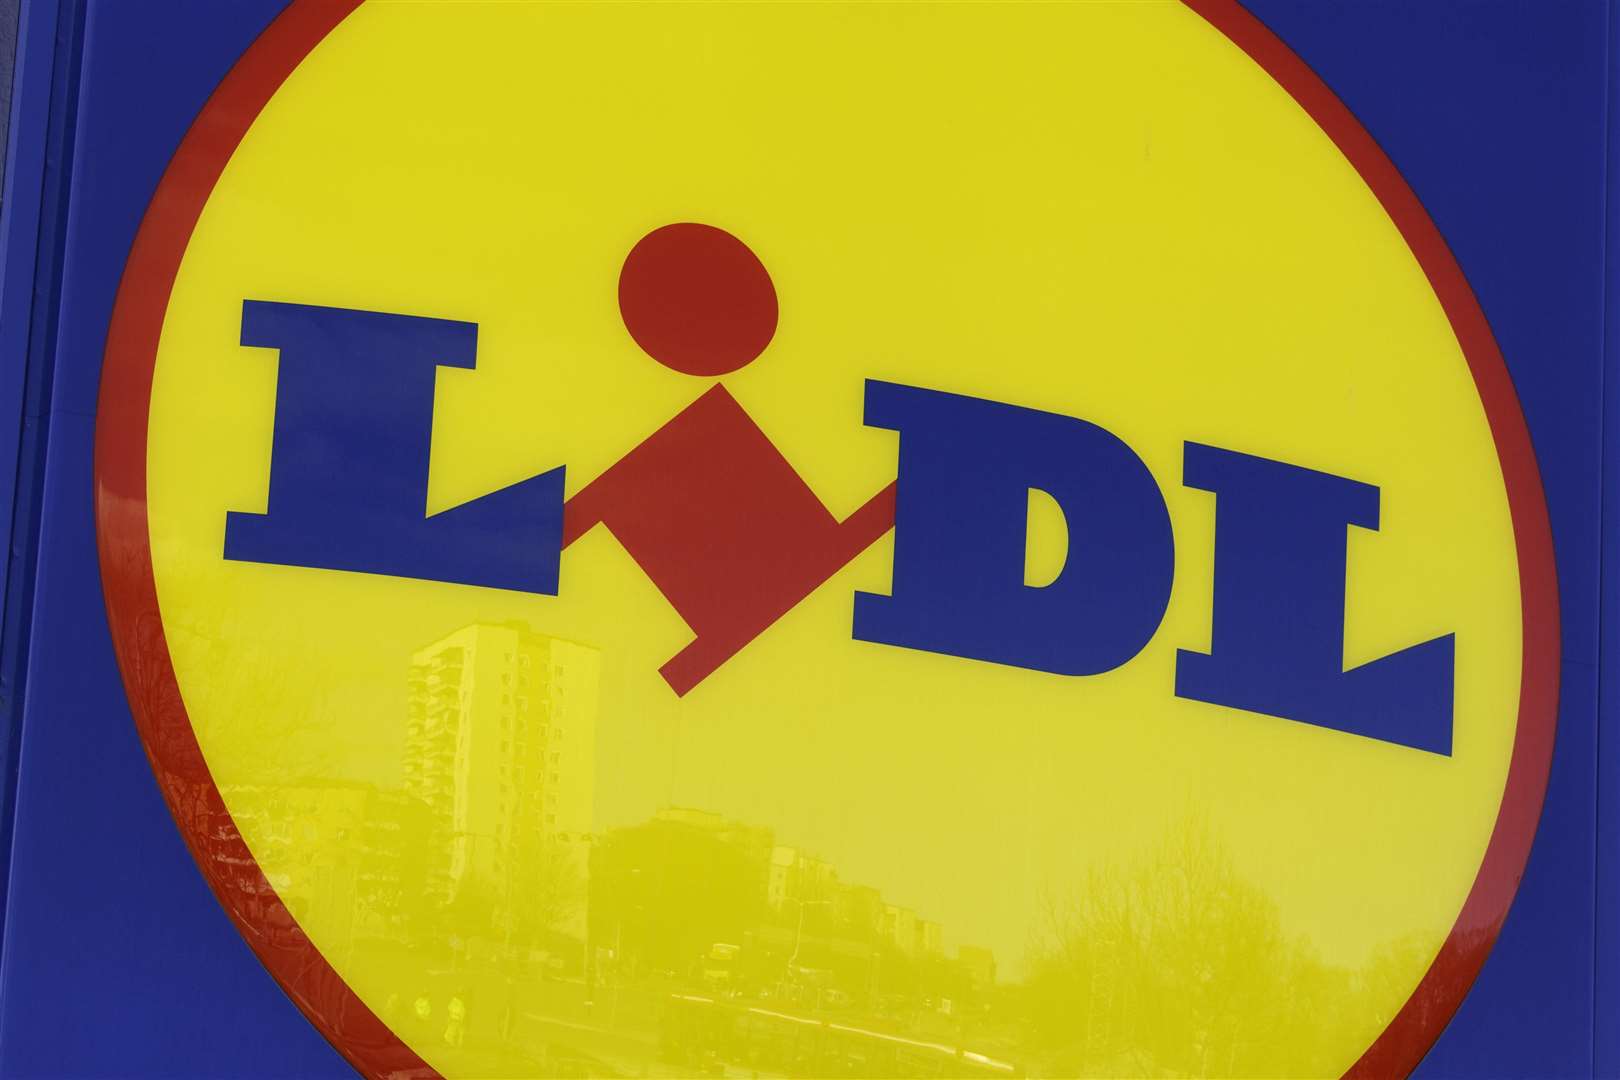 Lidl hope to open a store in Ditton